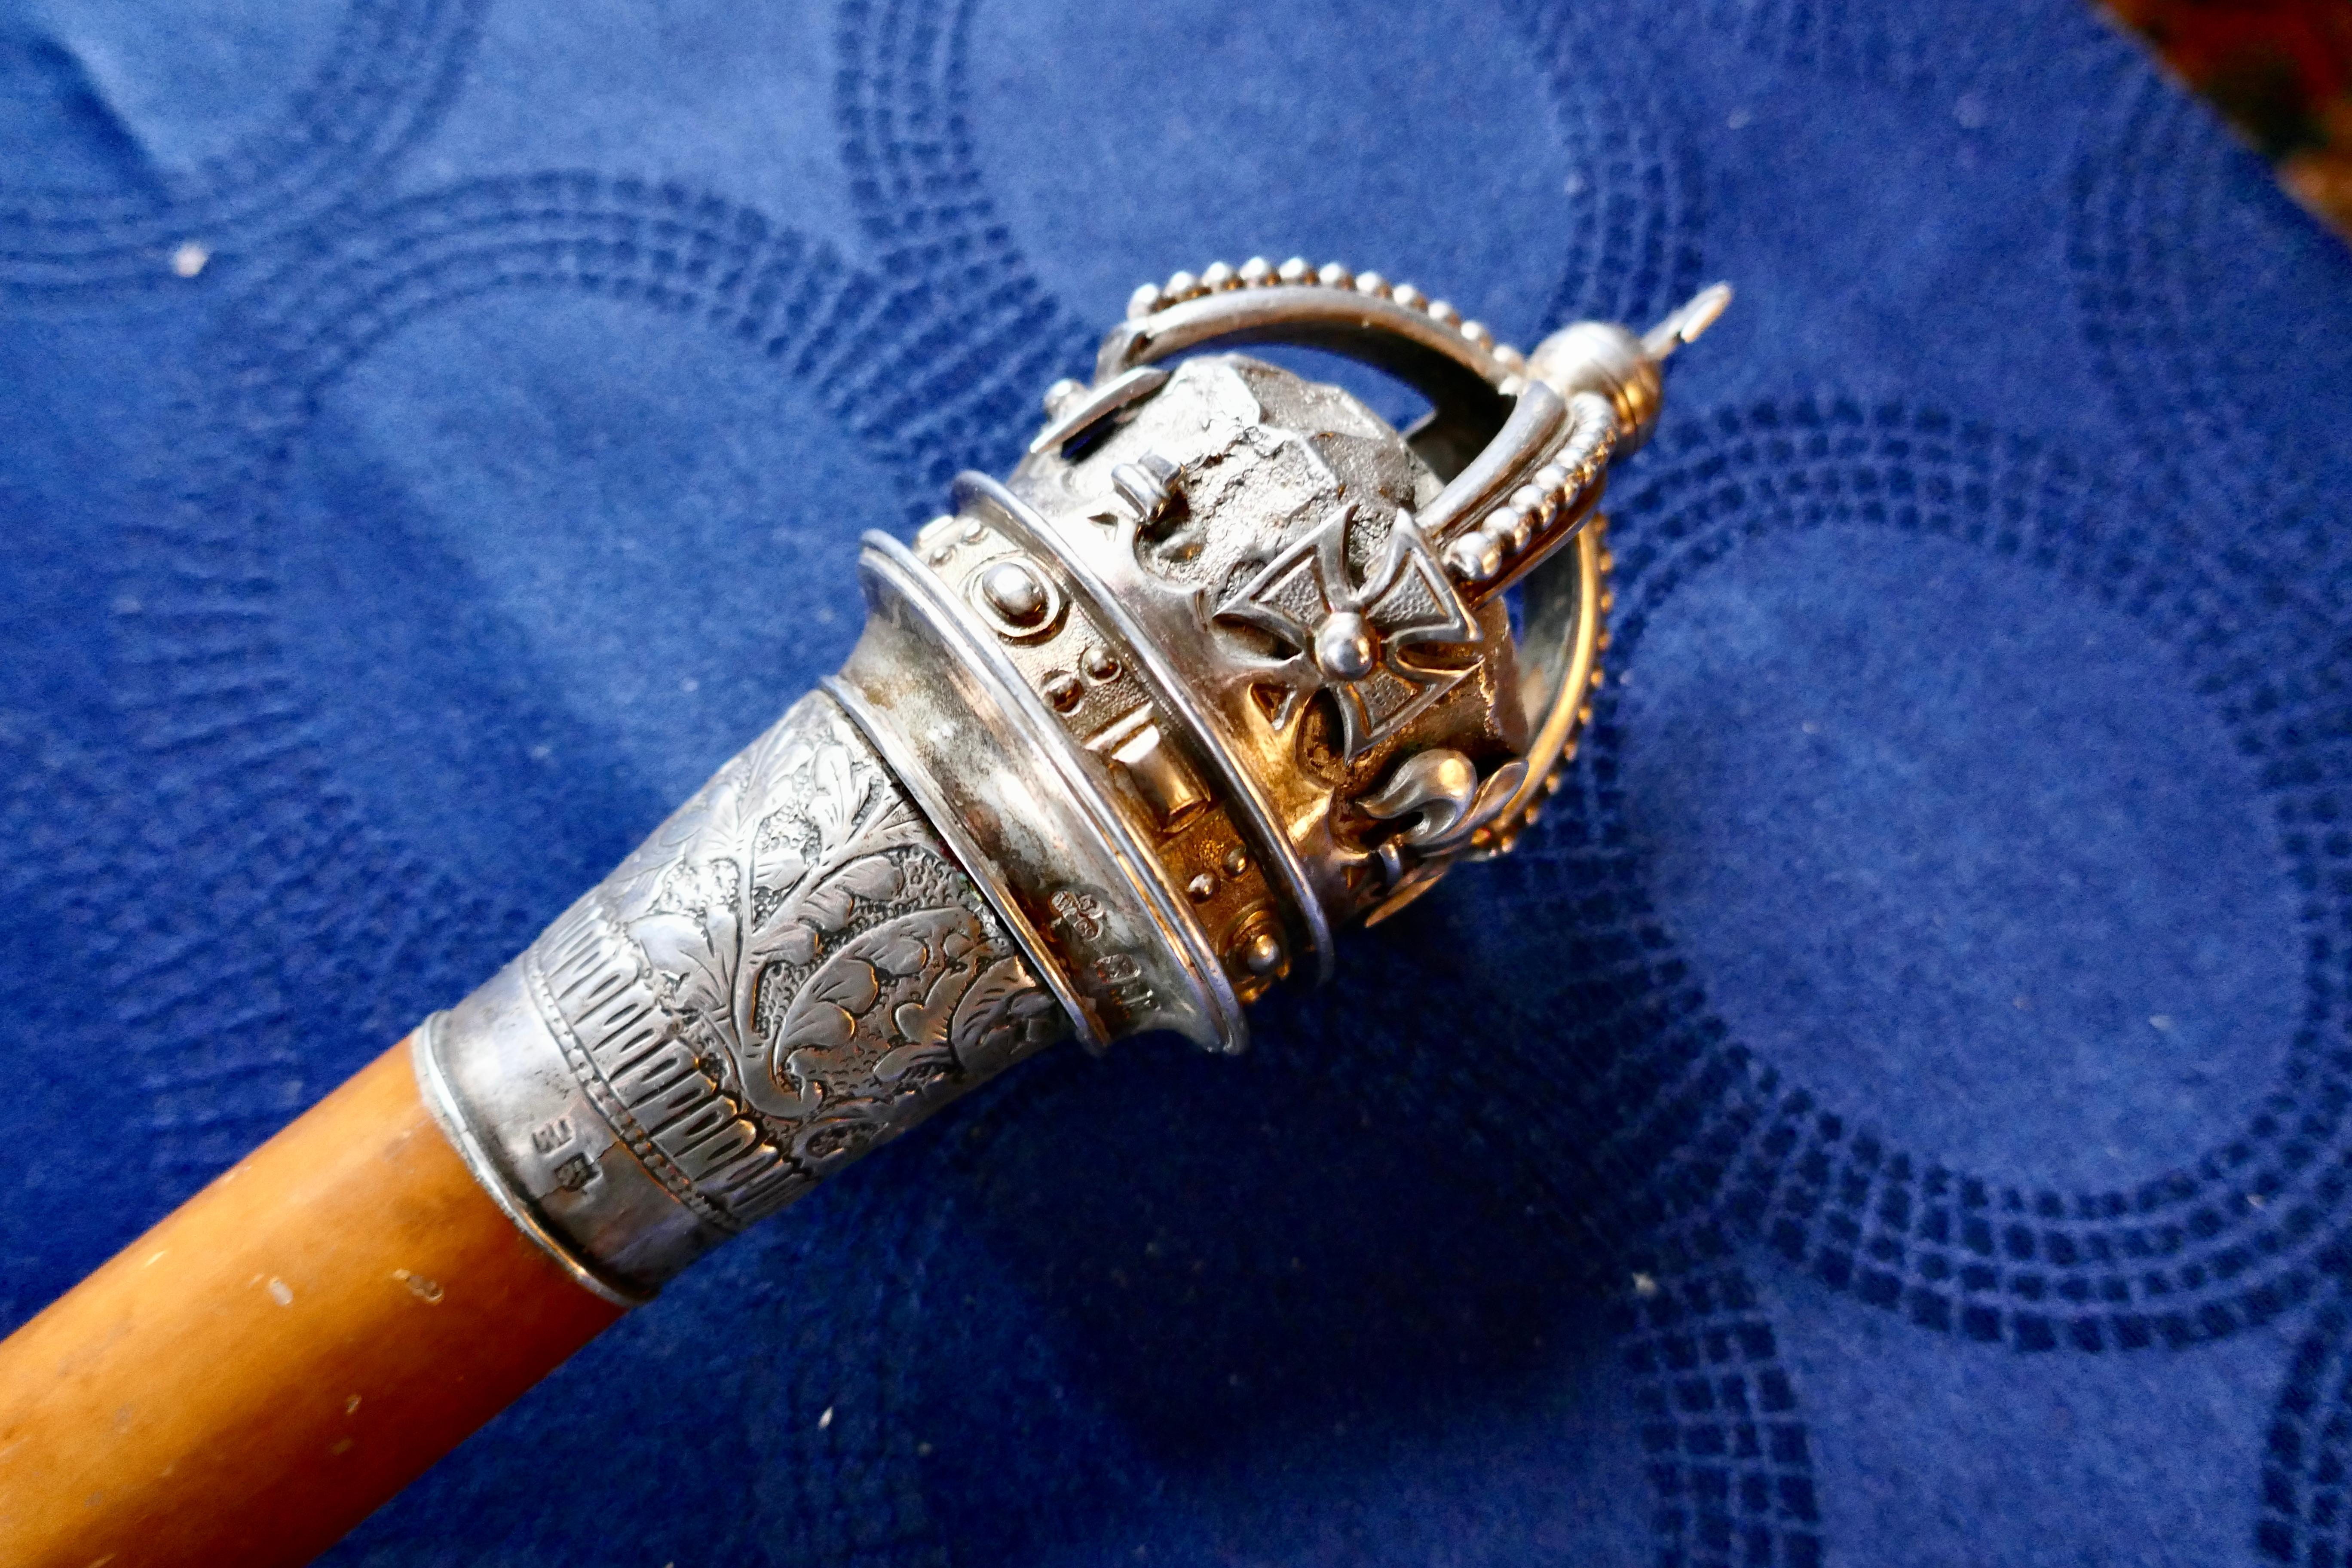 British Colonial Malacca Walking Cane with Sliver Crown Pommel by J Wippell & Co Ltd 1916